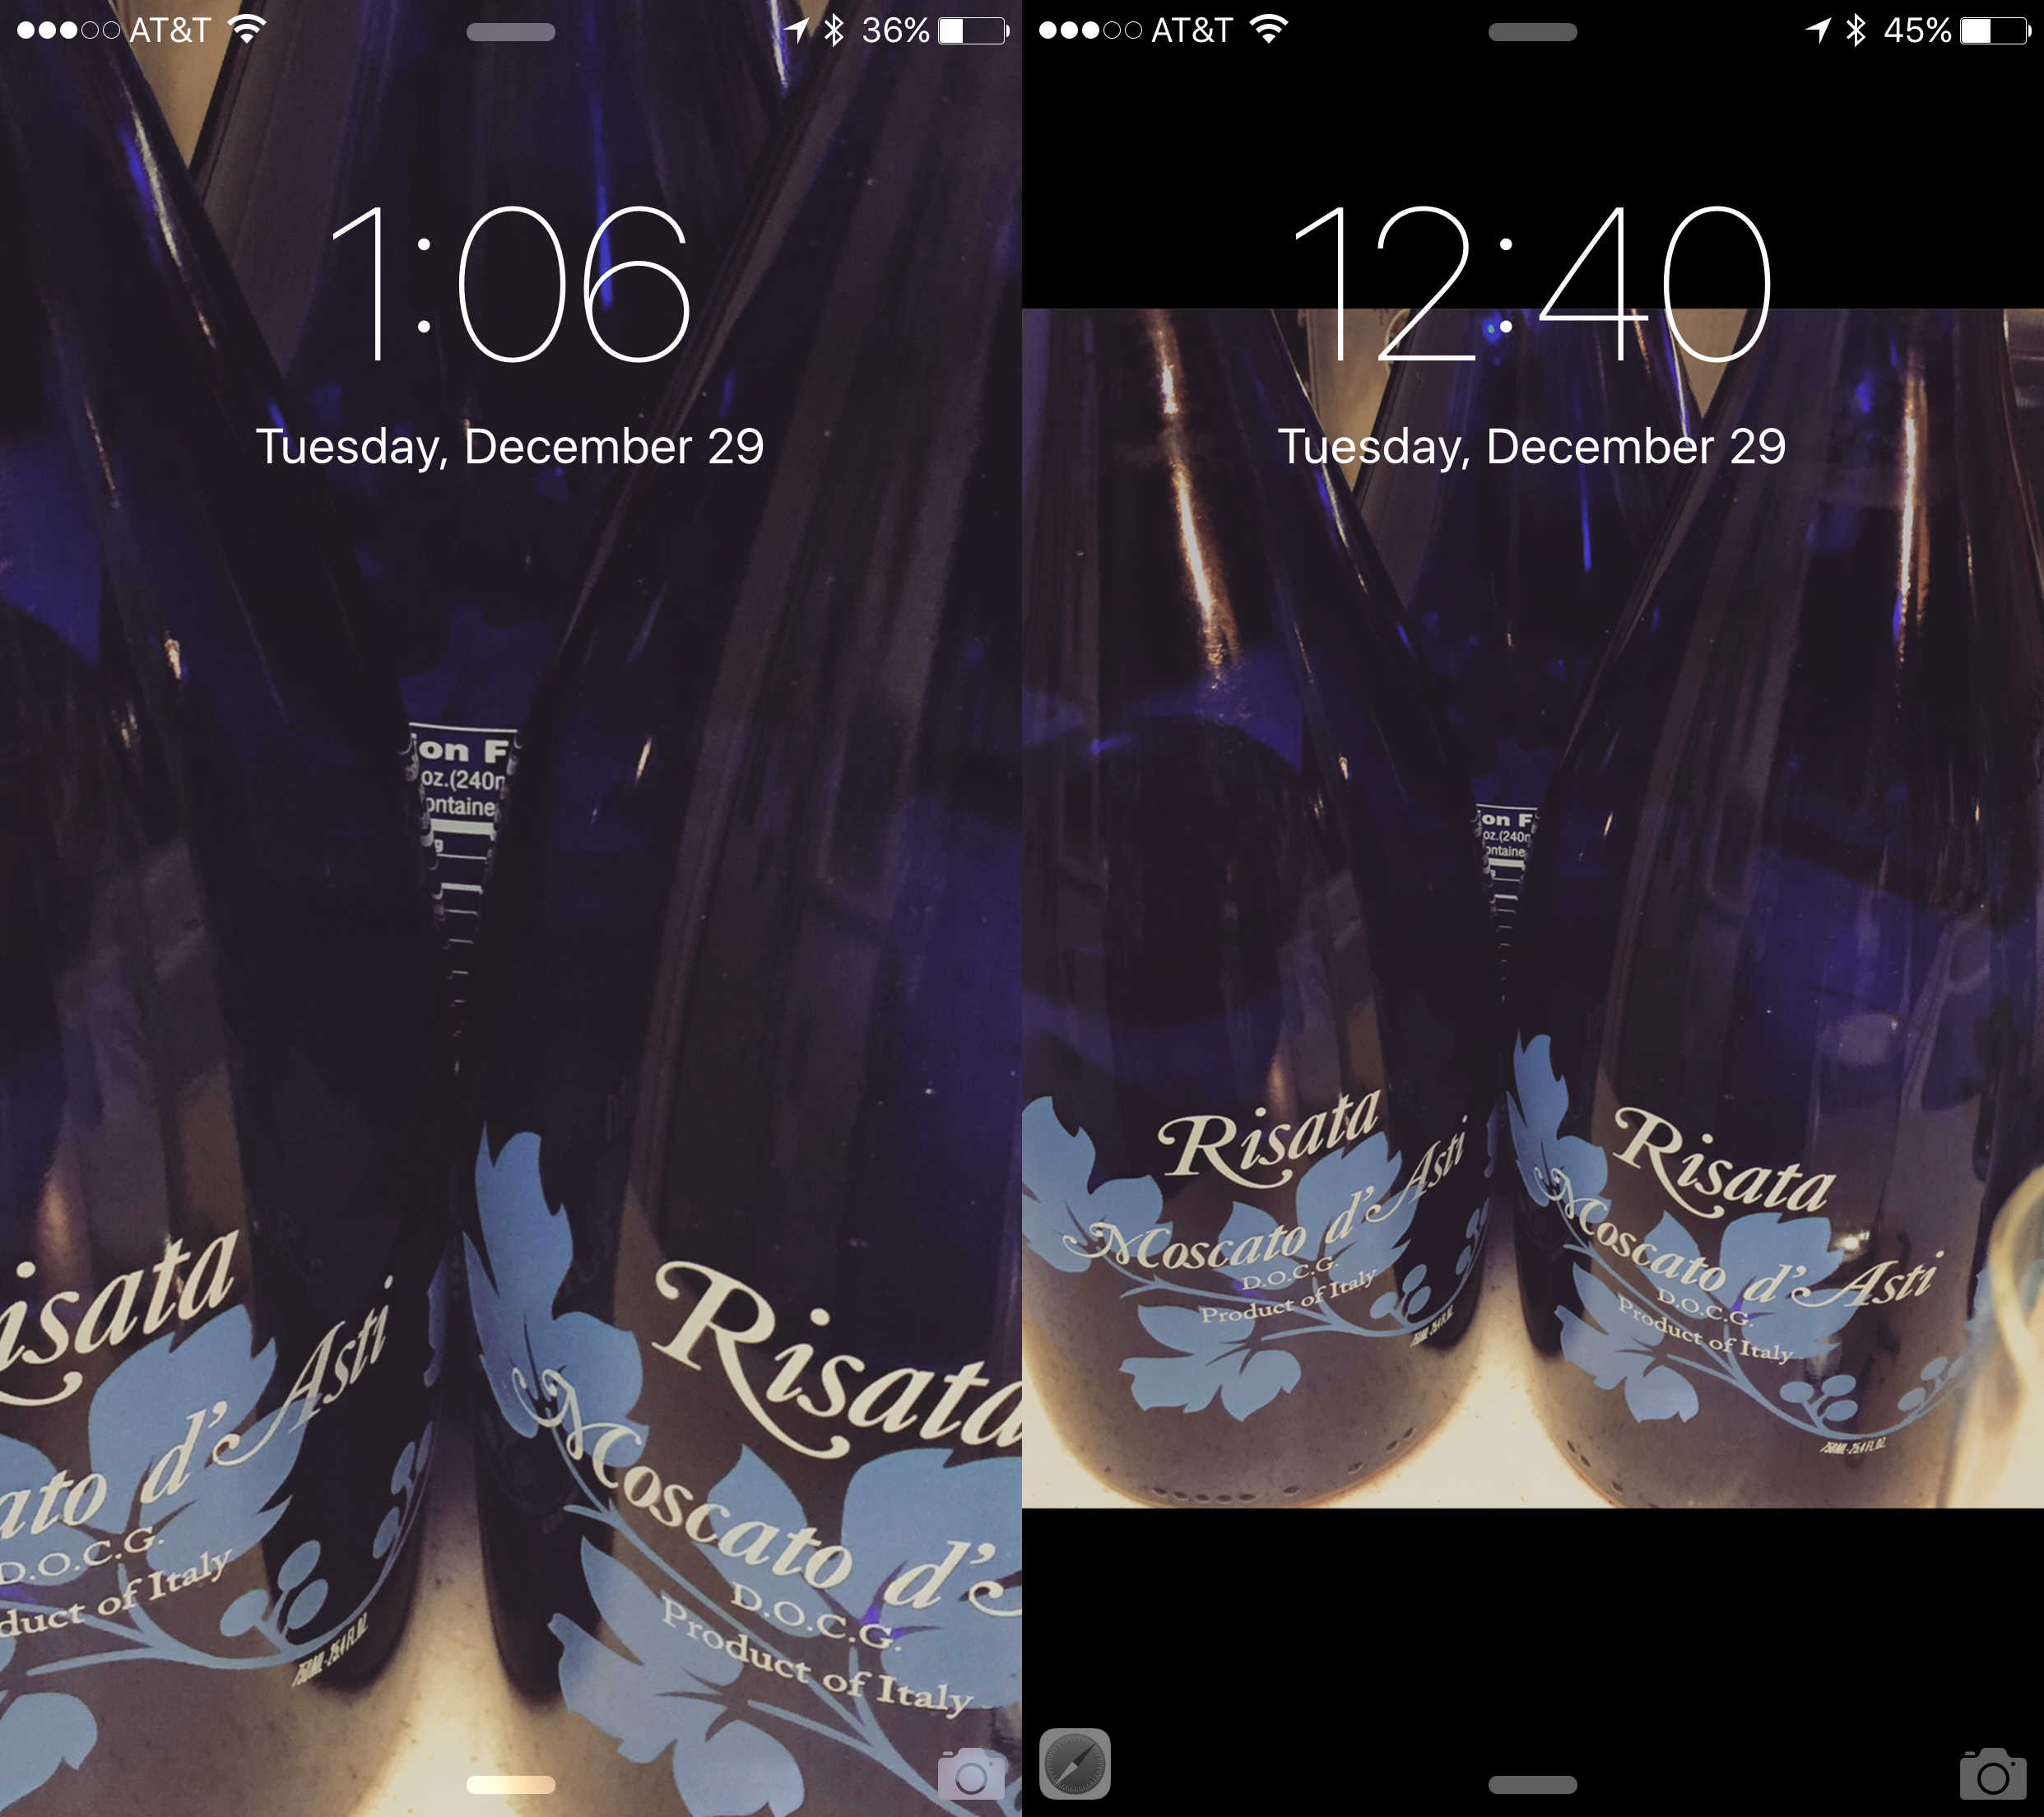 How to keep iPhone from ruining your square lock-screen photos | Cult of Mac